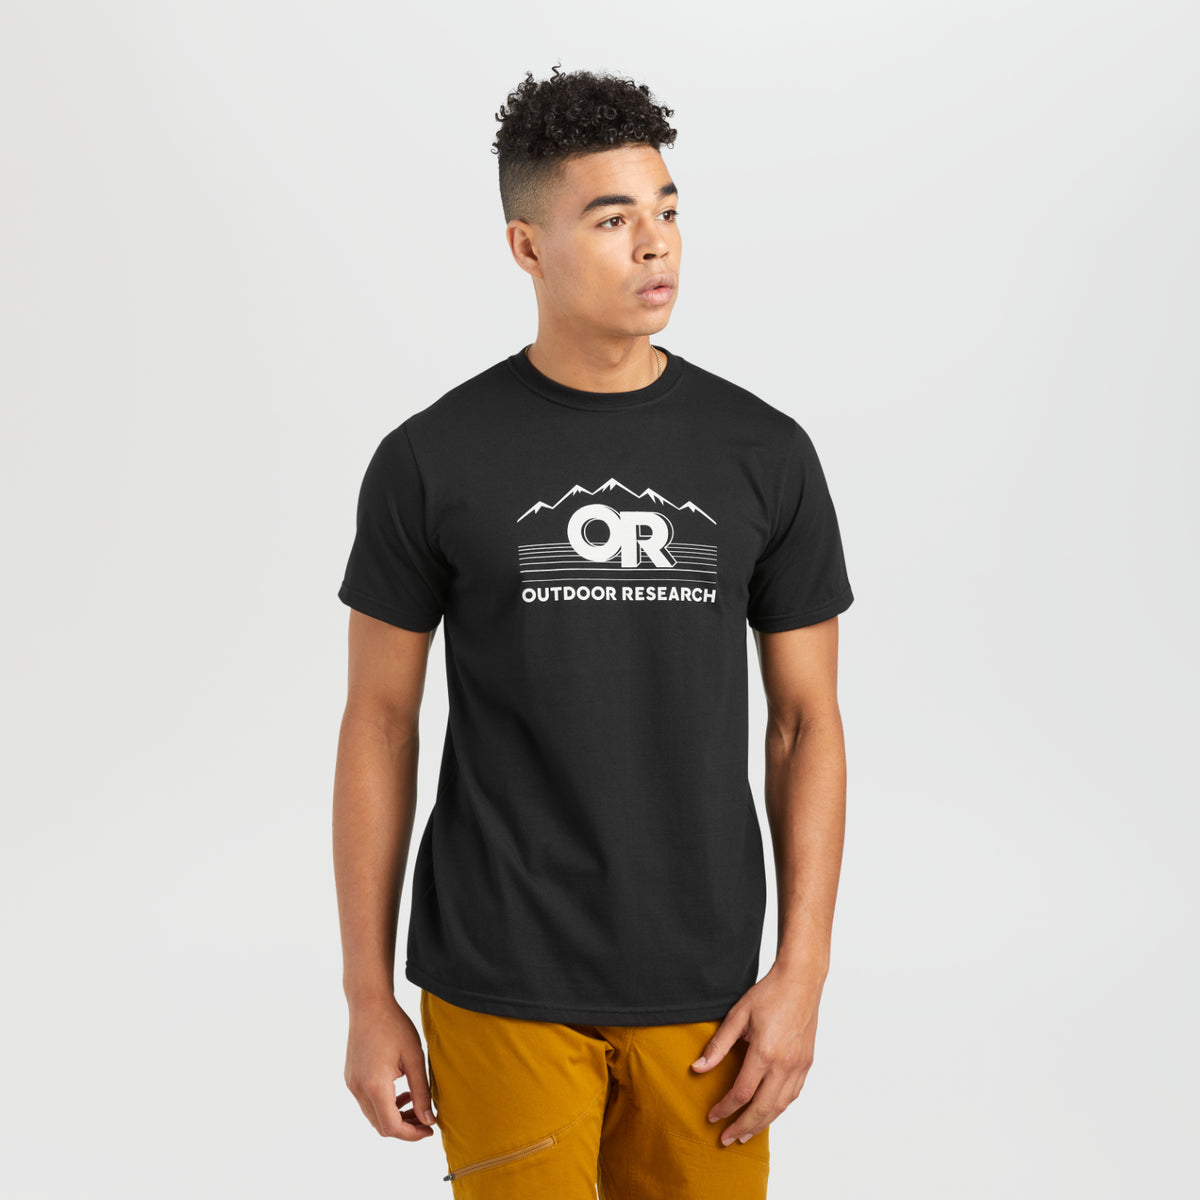 Outdoor Research Advocate Tee - Black/White - Unisex